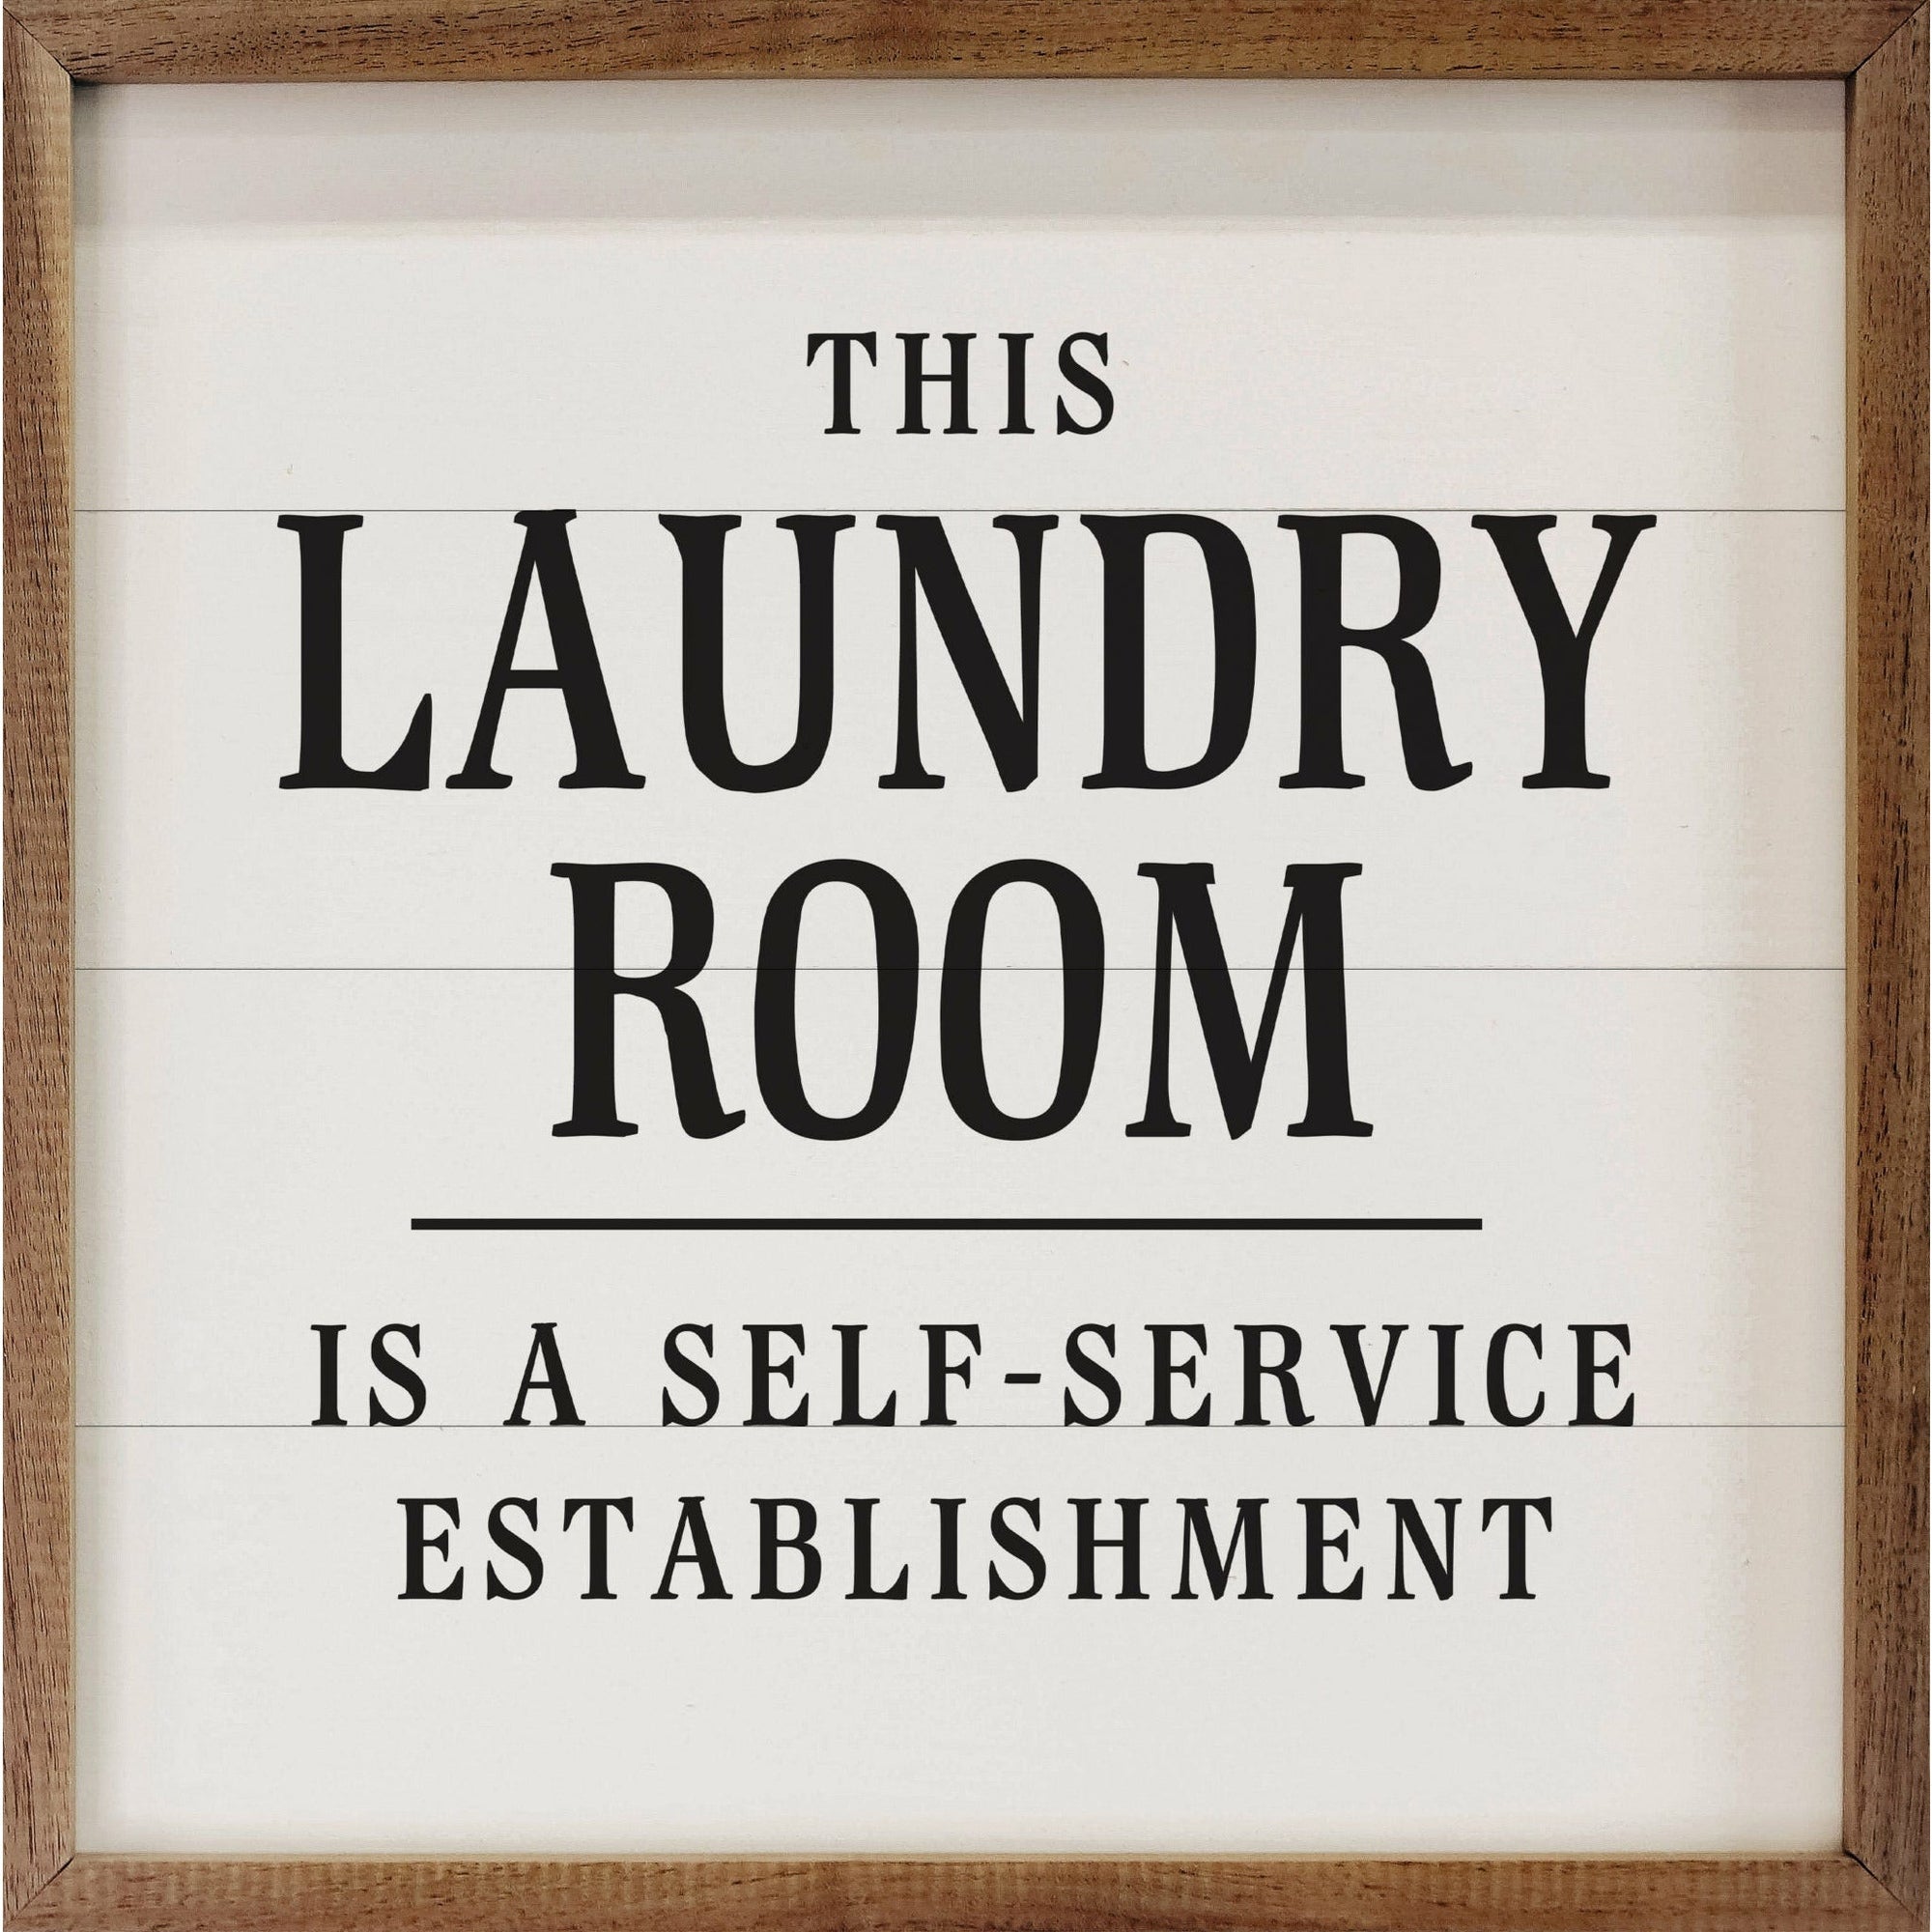 This Laundry Room Is A Self Service Wood Framed Print